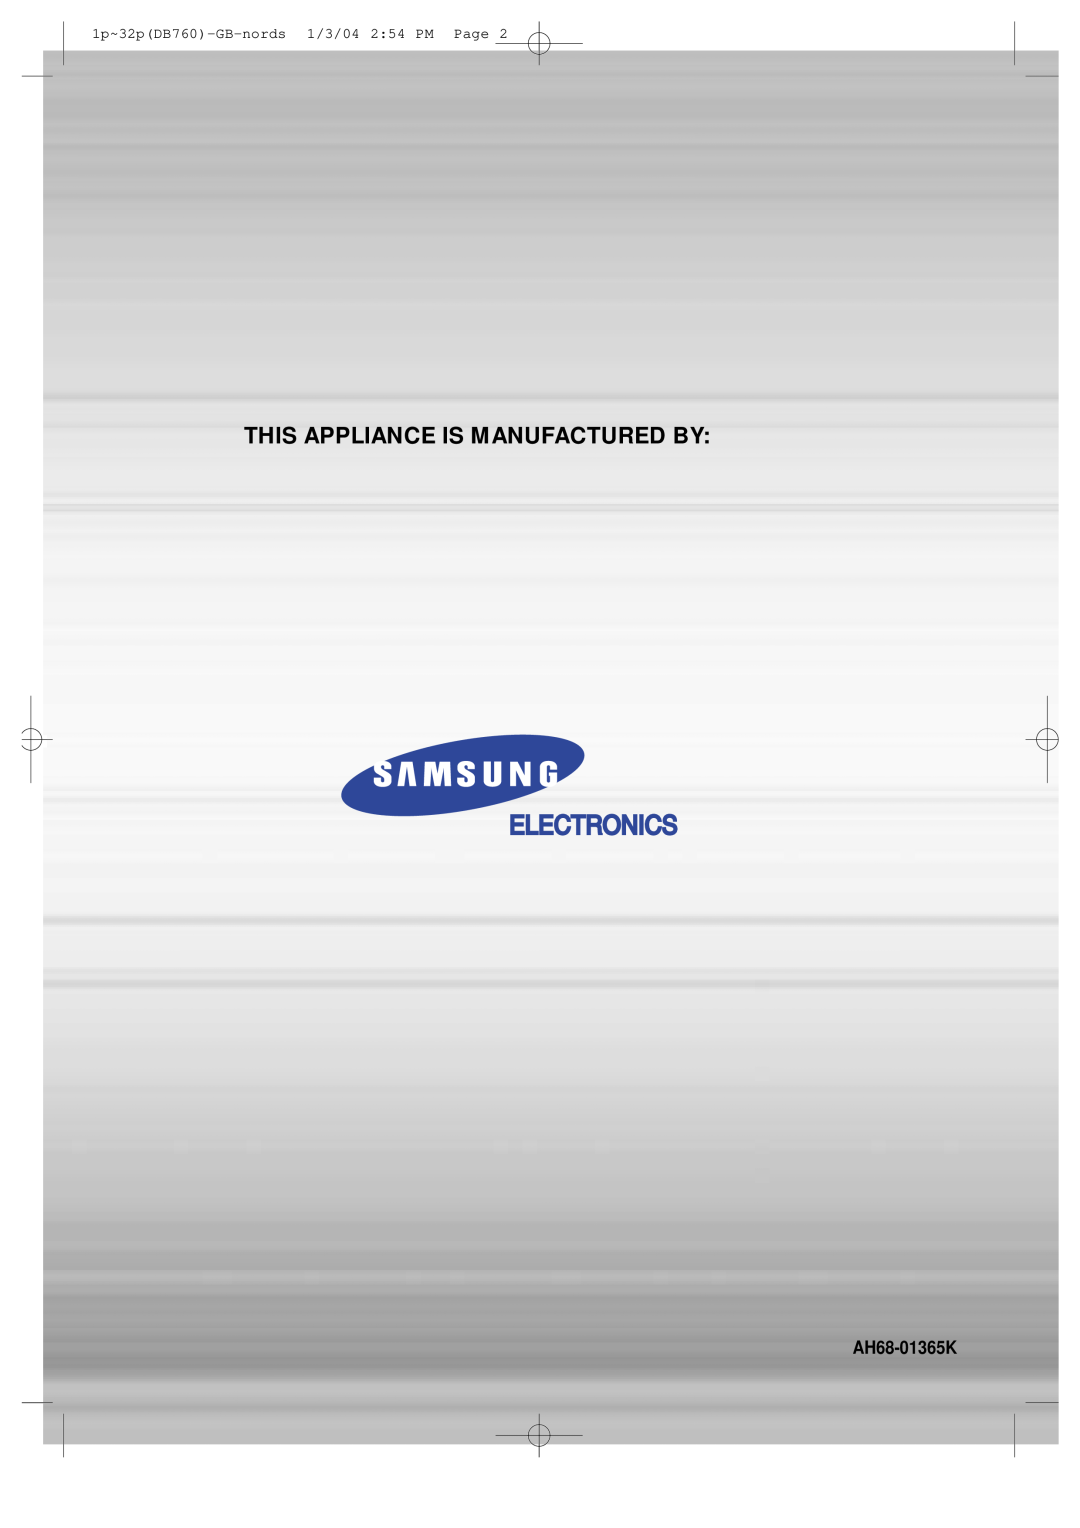 Samsung HTDB760TH/XSG manual This Appliance Is Manufactured By, AH68-01365K, 1p~32pDB760-GB-nords 1/3/04 254 PM Page 